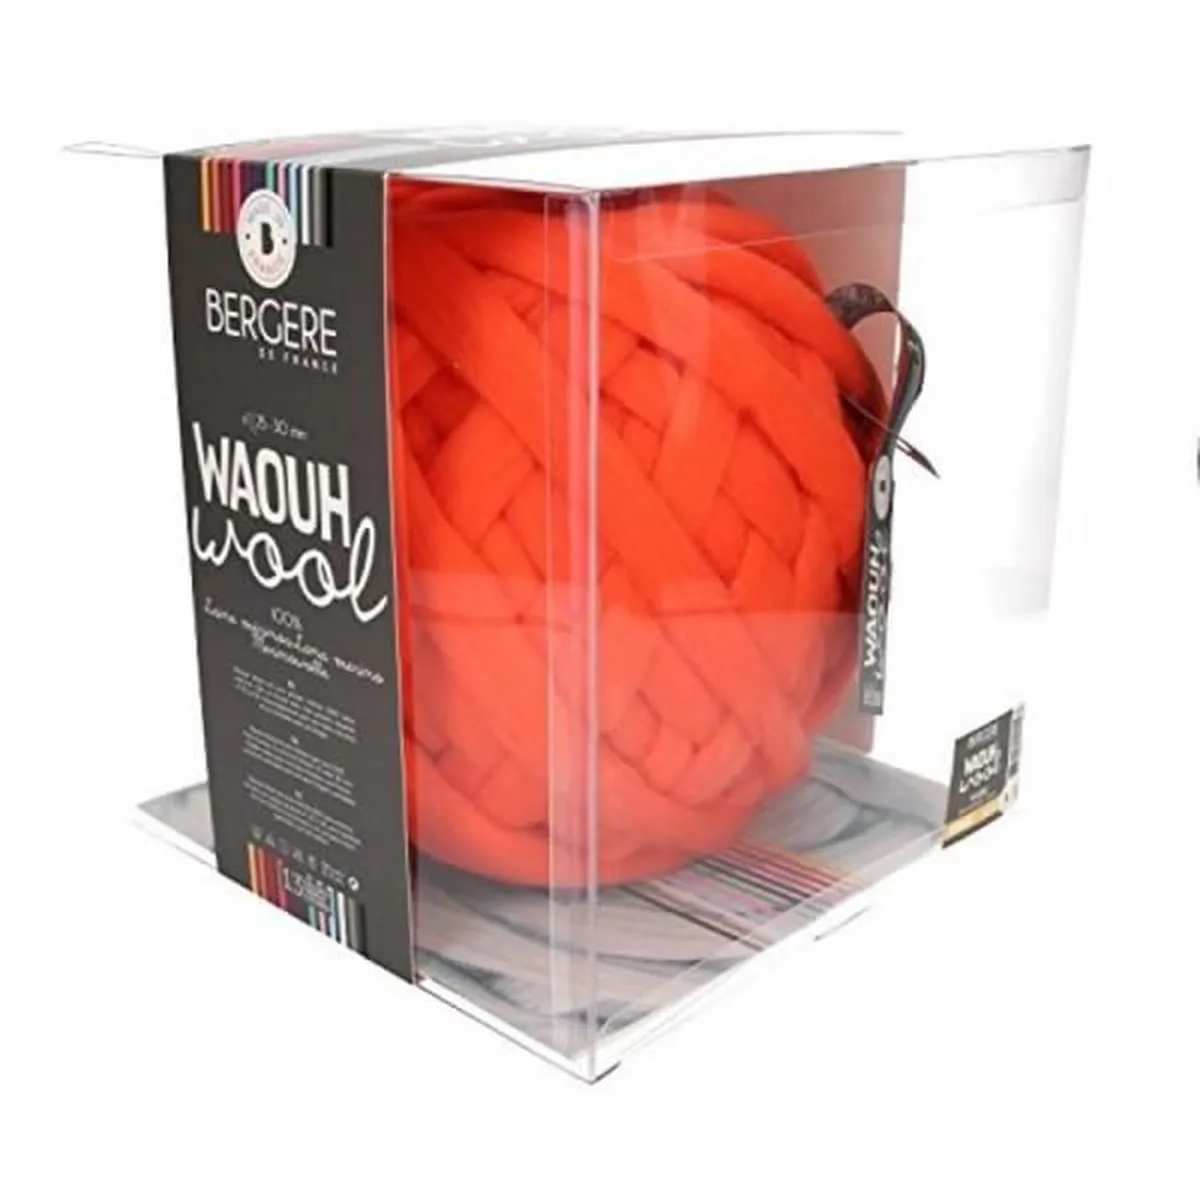 WAOUH Wool   62m / 500 g   Wolle + Anleitung